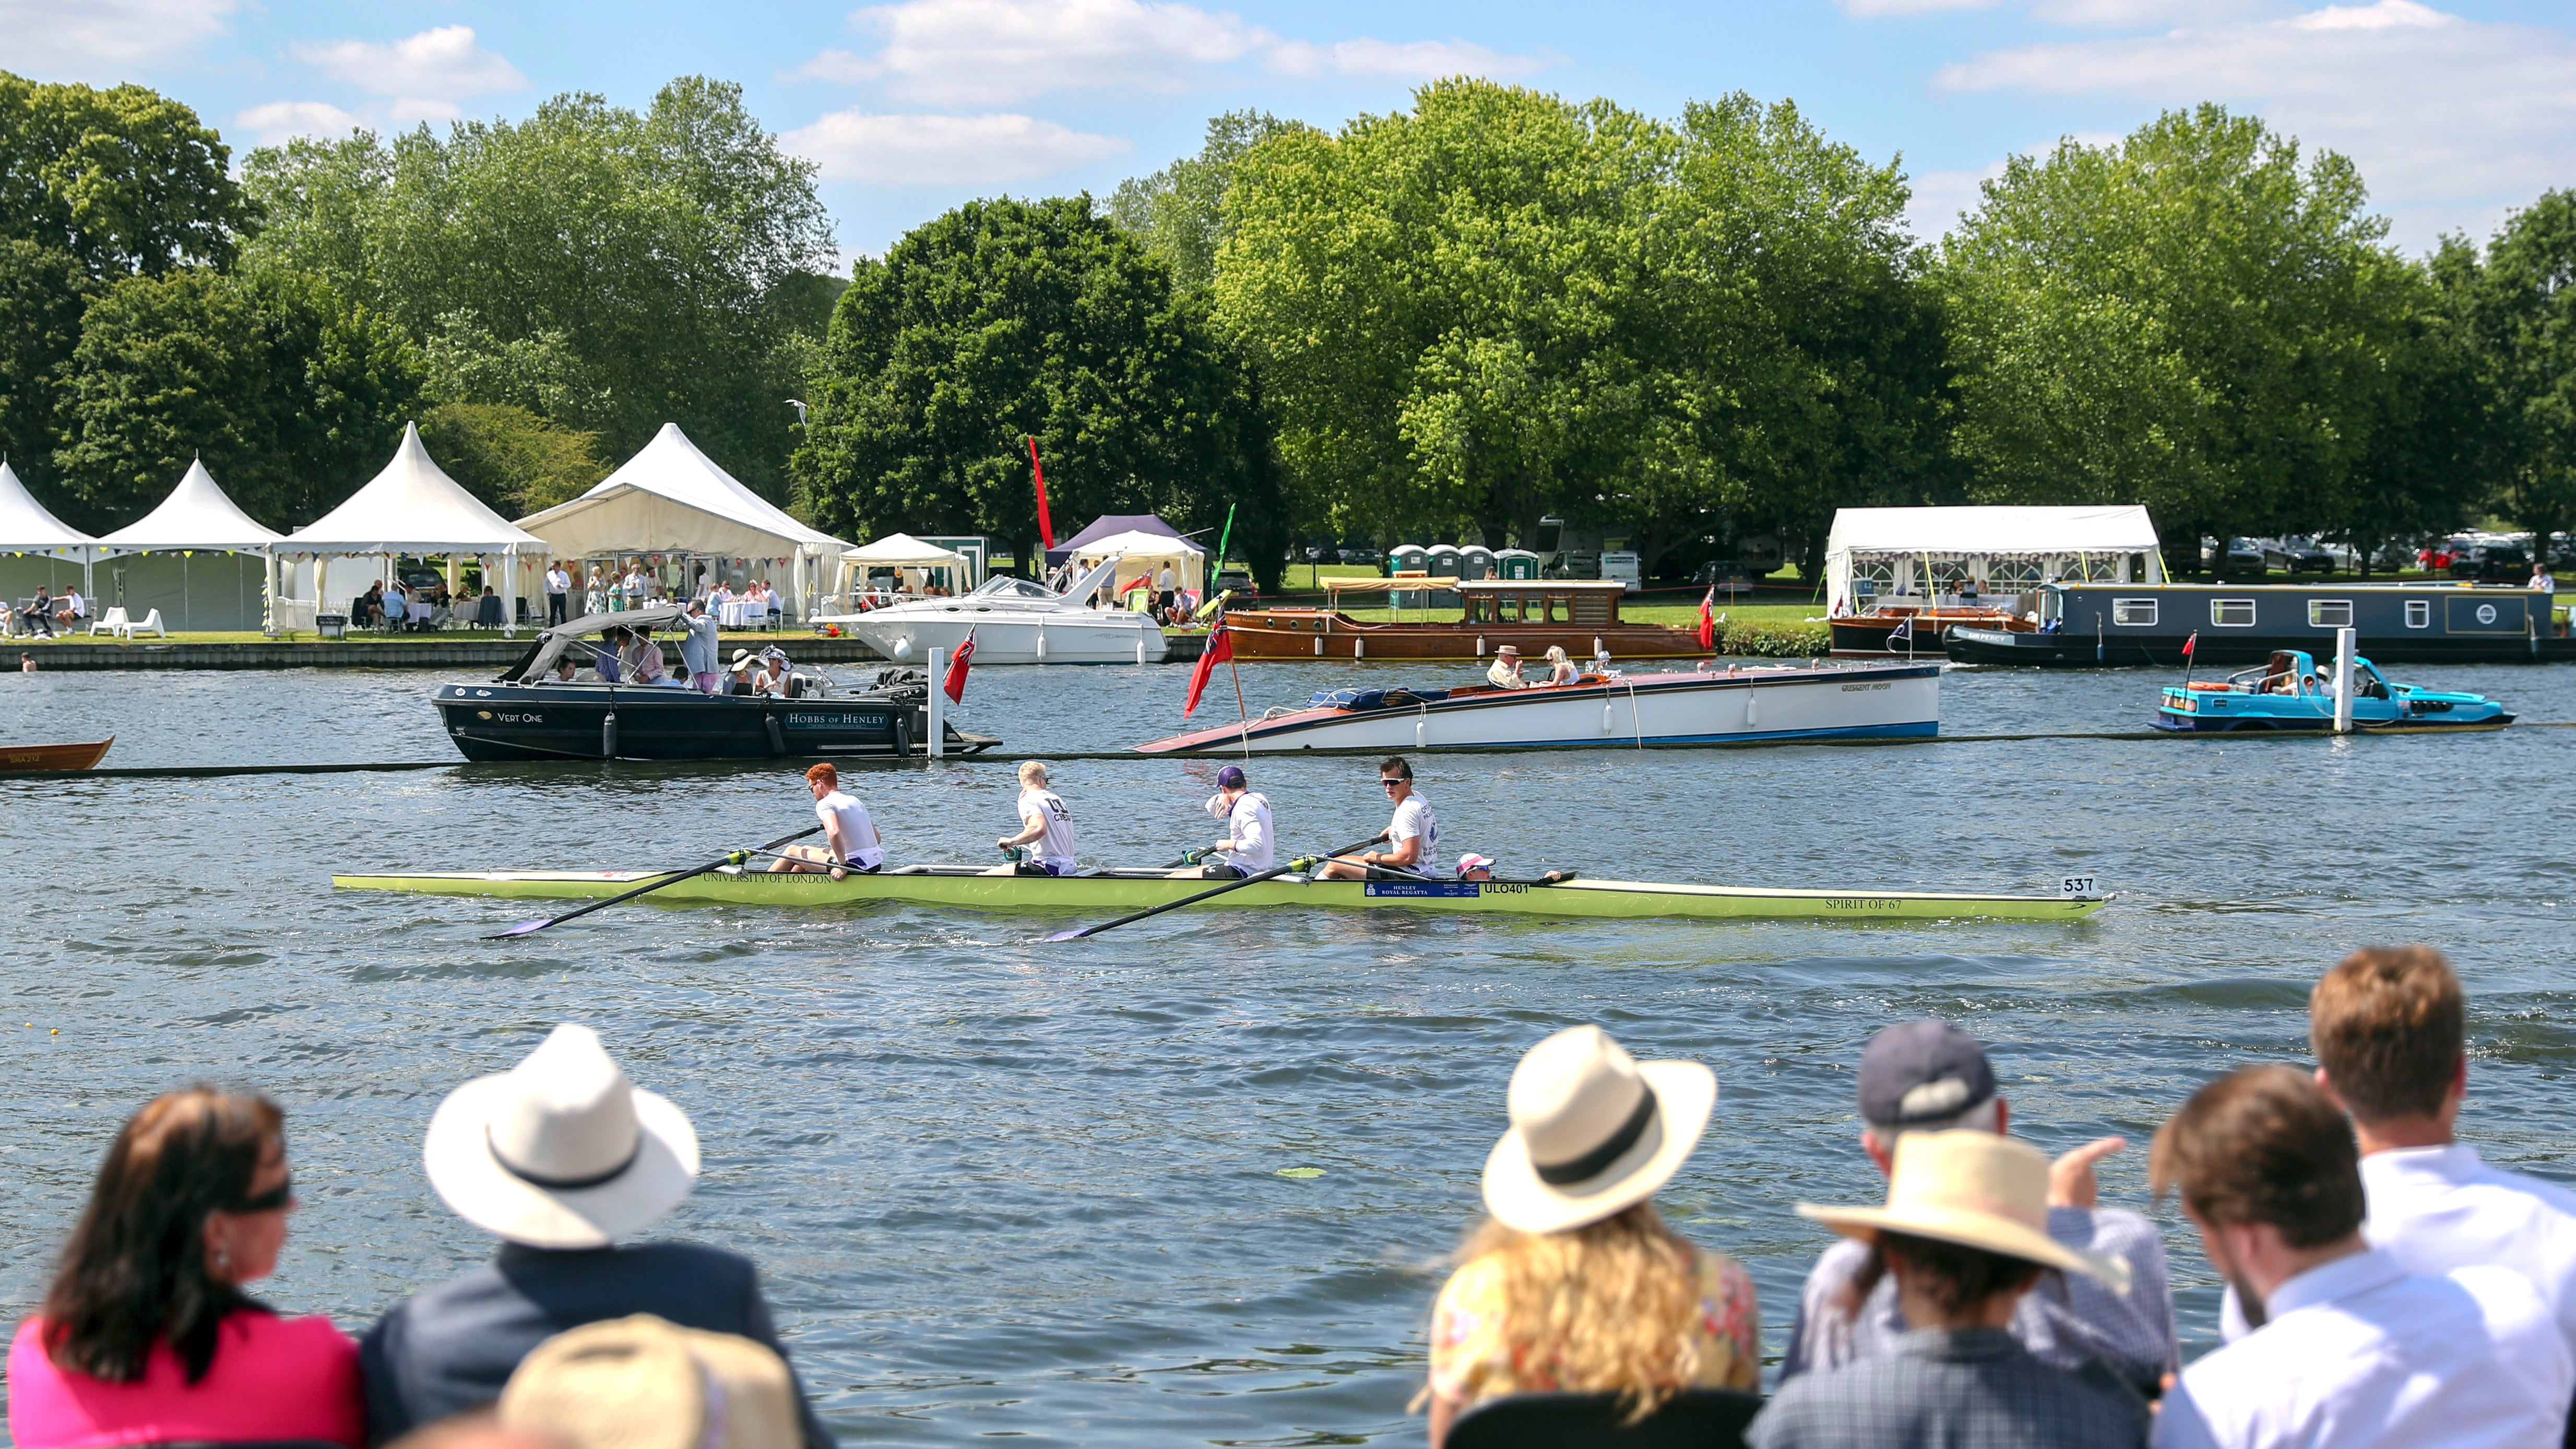 Spectators on the opening day of the 2019 Henley Royal Regatta alongside the river Thames